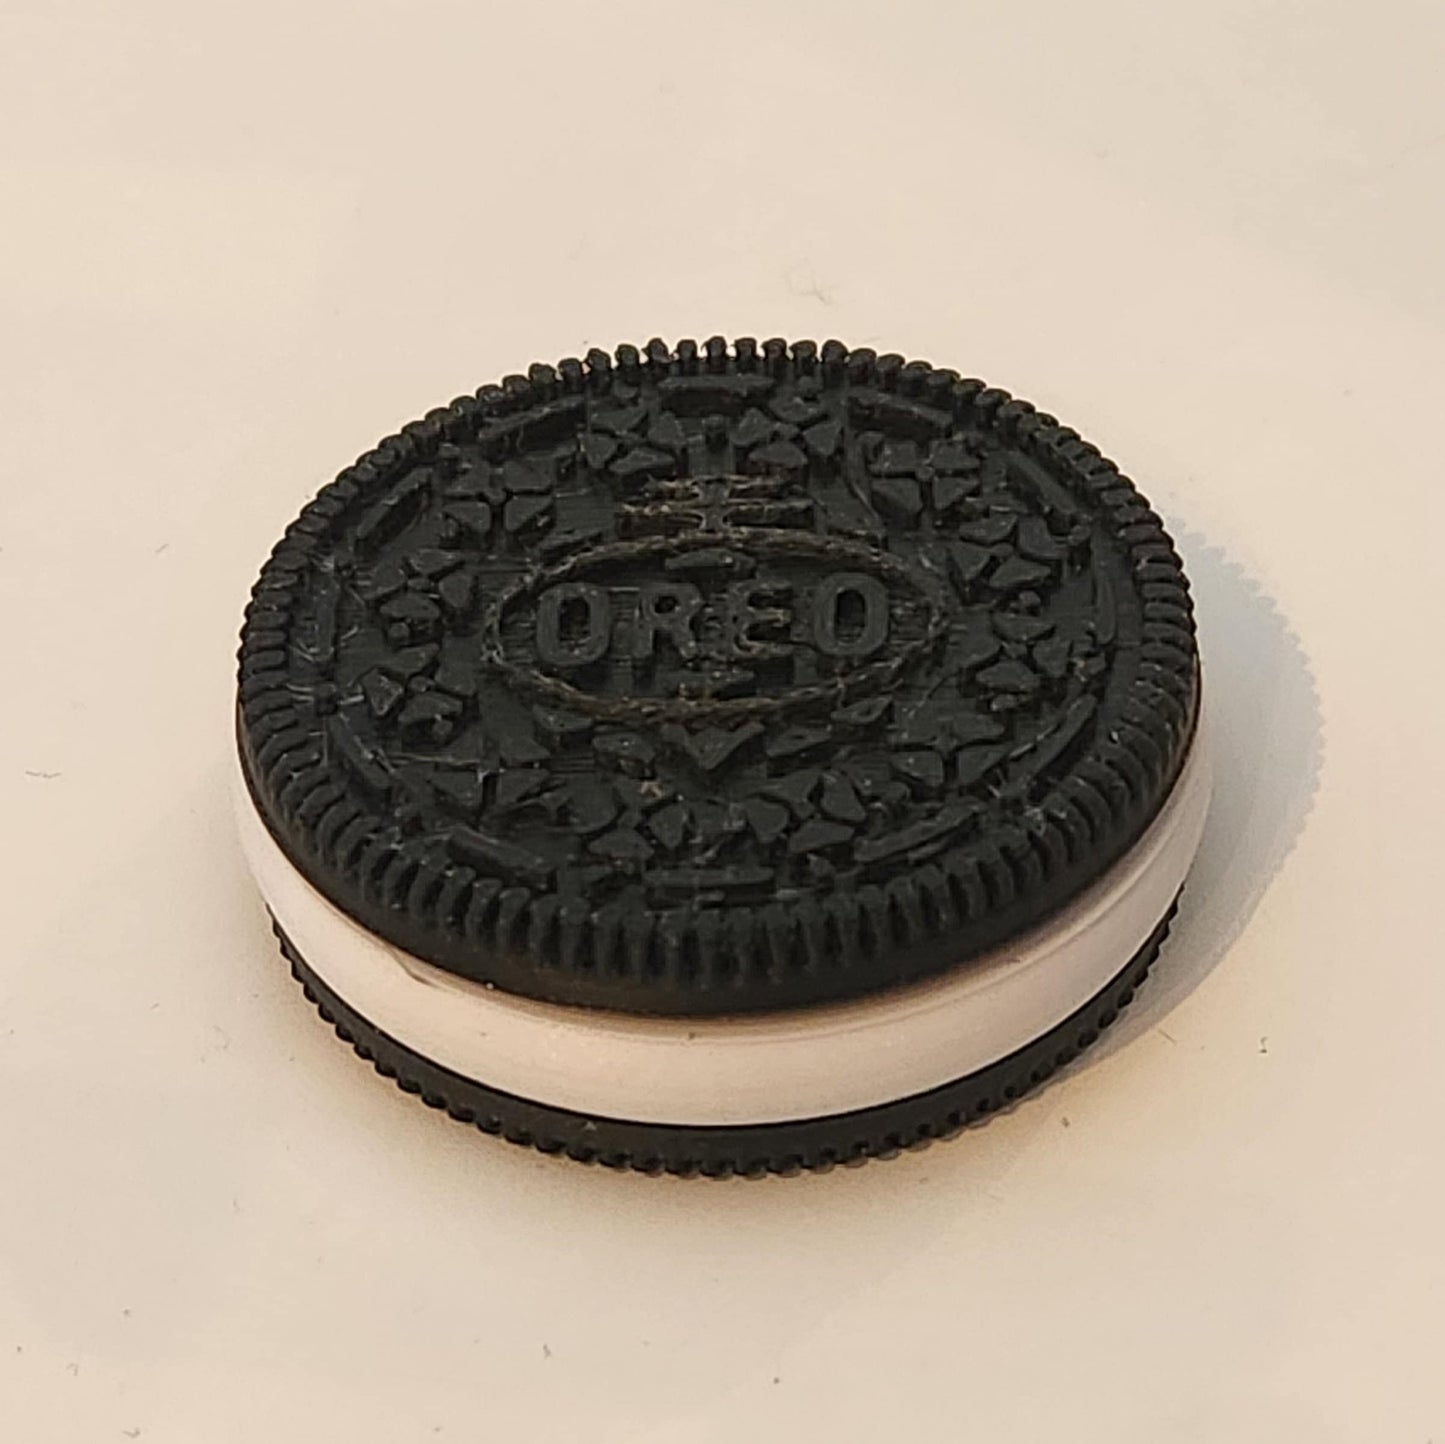 cookie-fidget-clicker-3d-printed-sensory-toy-for-stress-relief